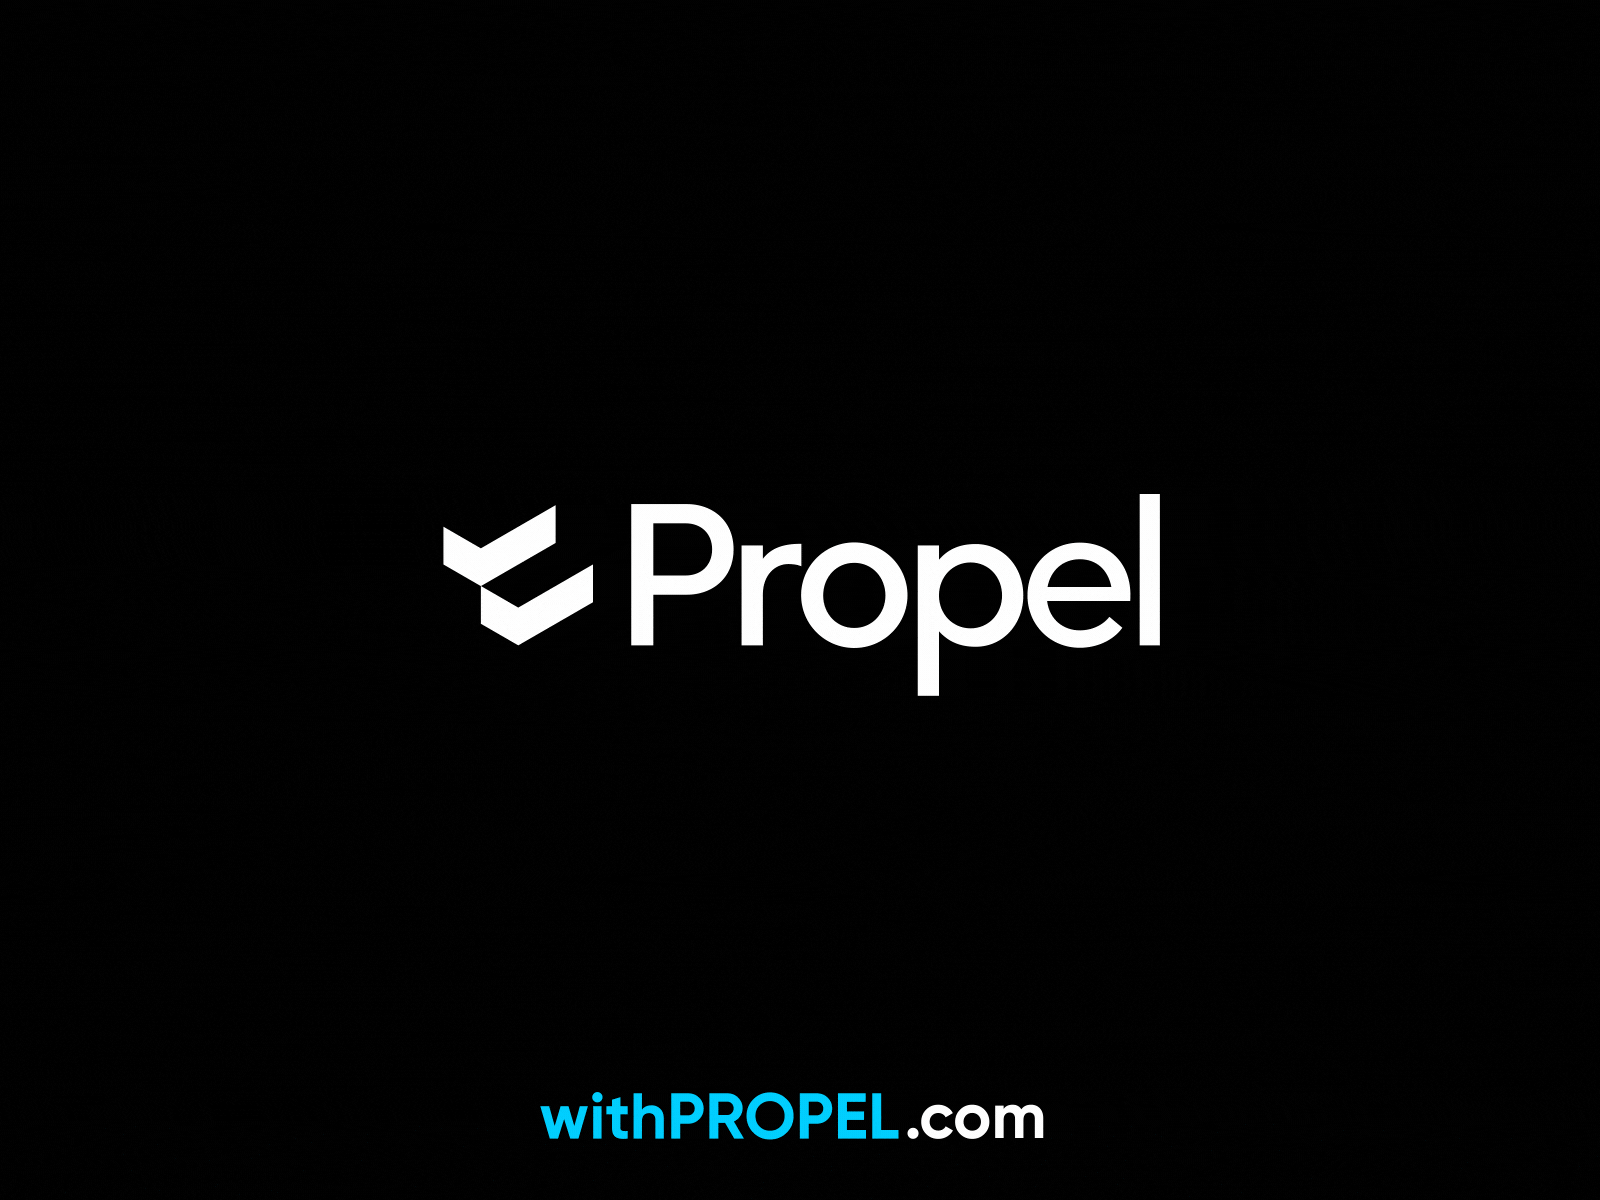 Propel - Authentic, Bold and Future-centric 🔥